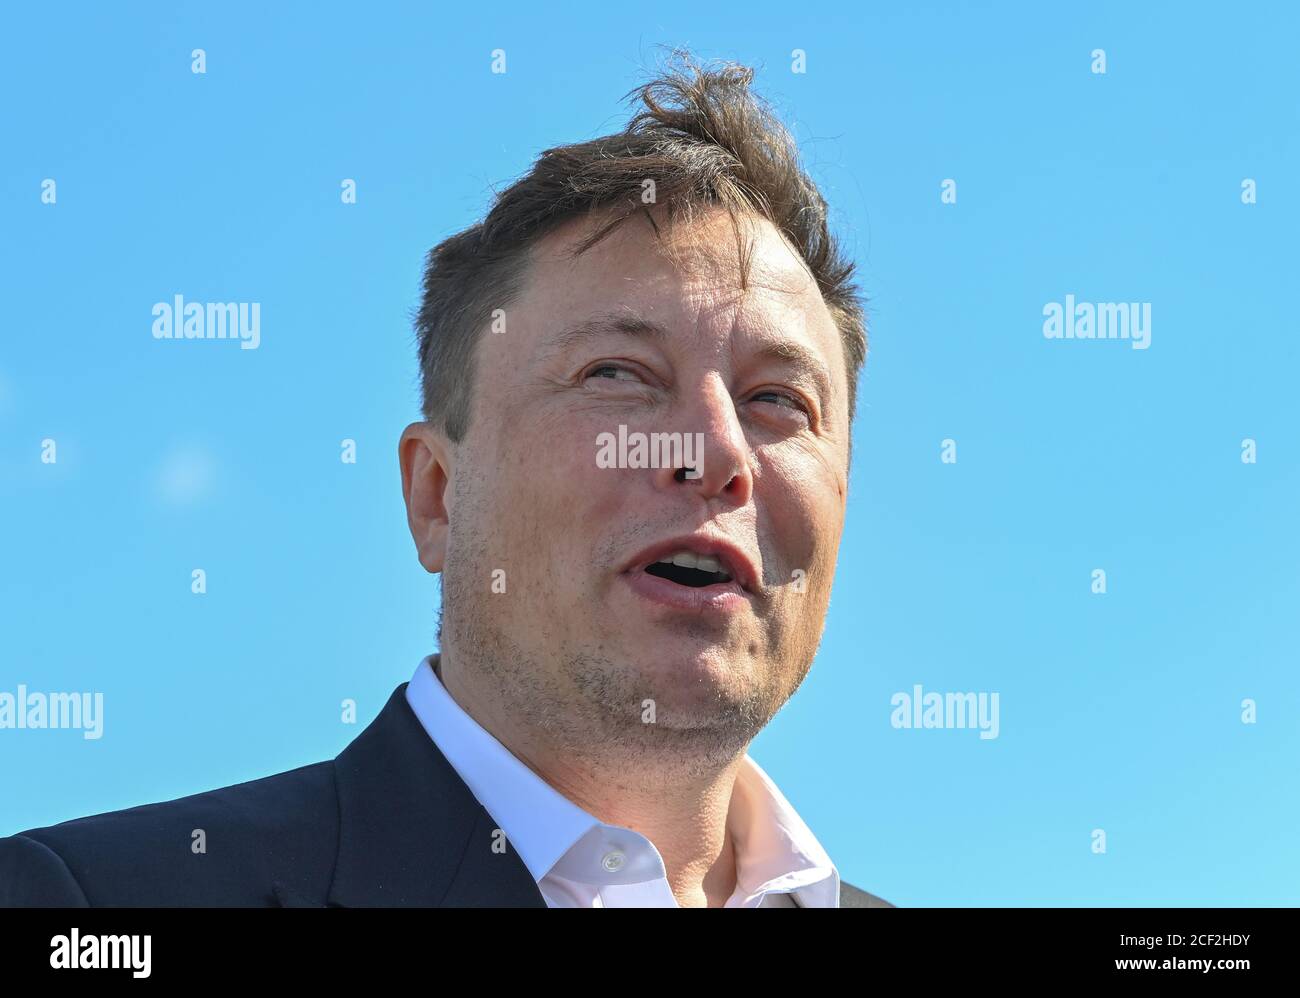 https://c8.alamy.com/comp/2CF2HDY/03-september-2020-brandenburg-grnheide-germany-elon-musk-head-of-tesla-stands-on-the-construction-site-of-the-tesla-gigafactory-in-grnheide-near-berlin-a-maximum-of-500000-vehicles-per-year-are-to-roll-off-the-assembly-line-starting-in-july-2021-according-to-the-plans-of-the-car-manufacturer-the-maximum-is-to-be-reached-as-quickly-as-possible-photo-patrick-pleuldpa-zentralbildzb-credit-dpa-picture-alliancealamy-live-news-2CF2HDY.jpg